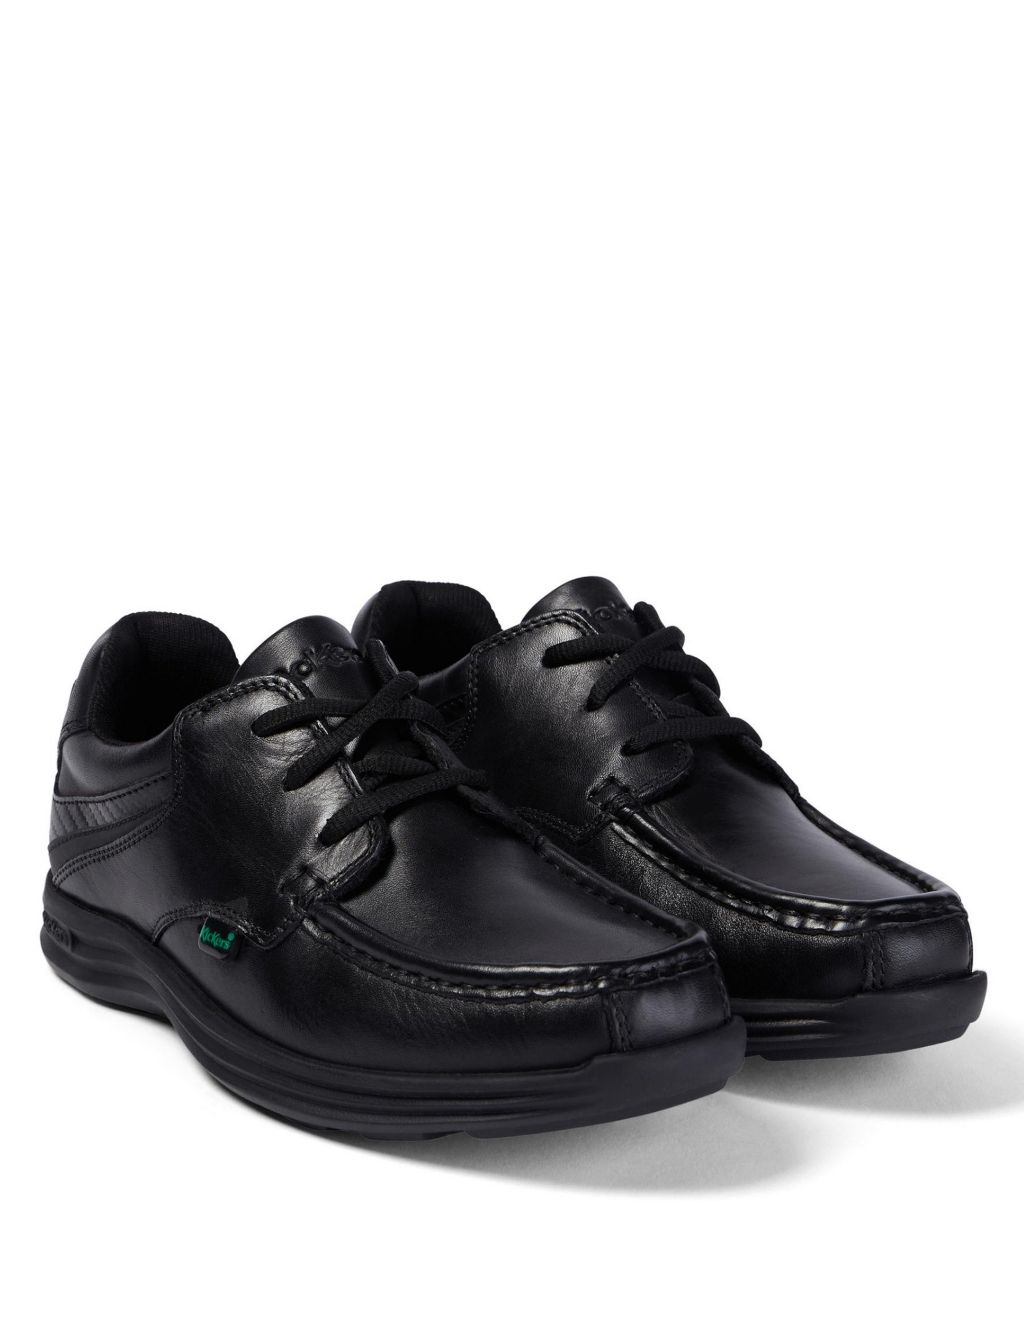 Kids' Leather Lace School Shoes image 2